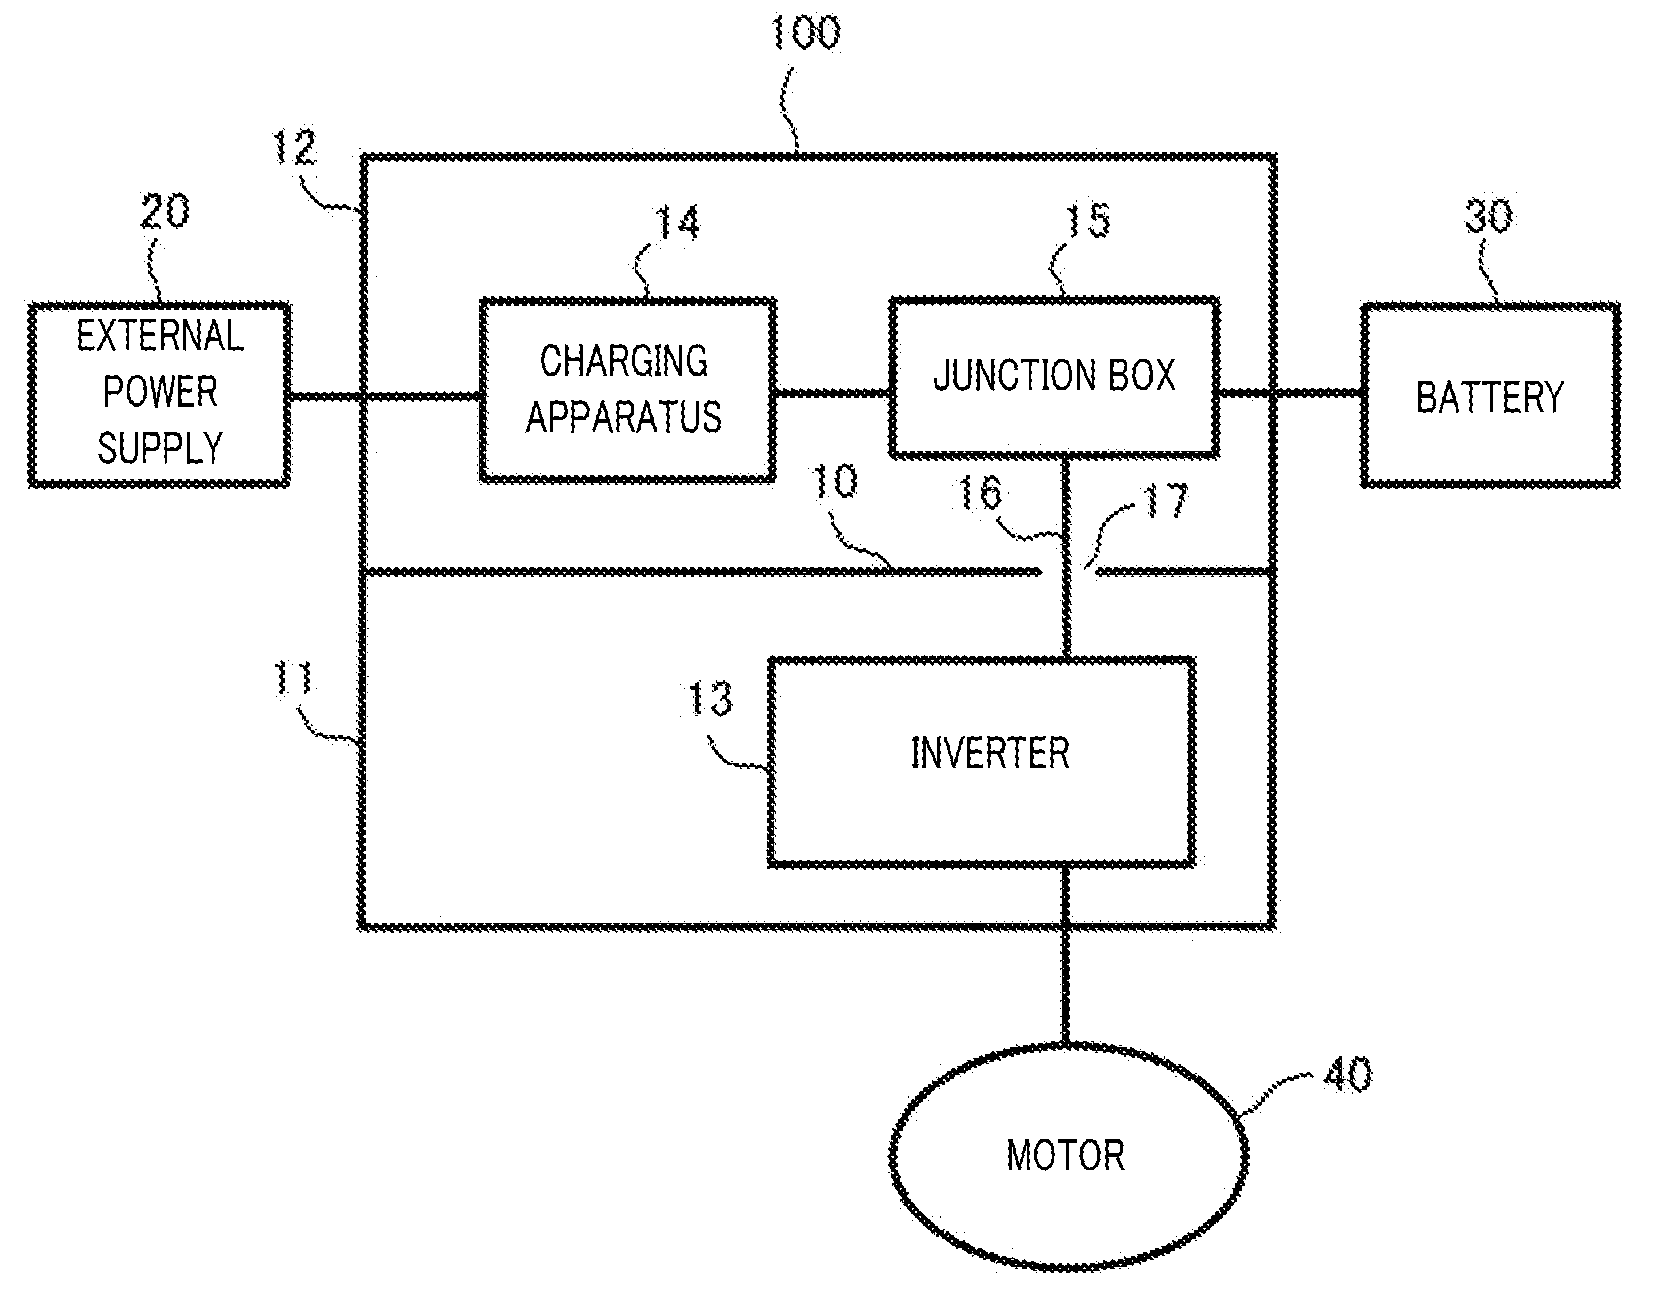 Power conversion apparatus and junction box